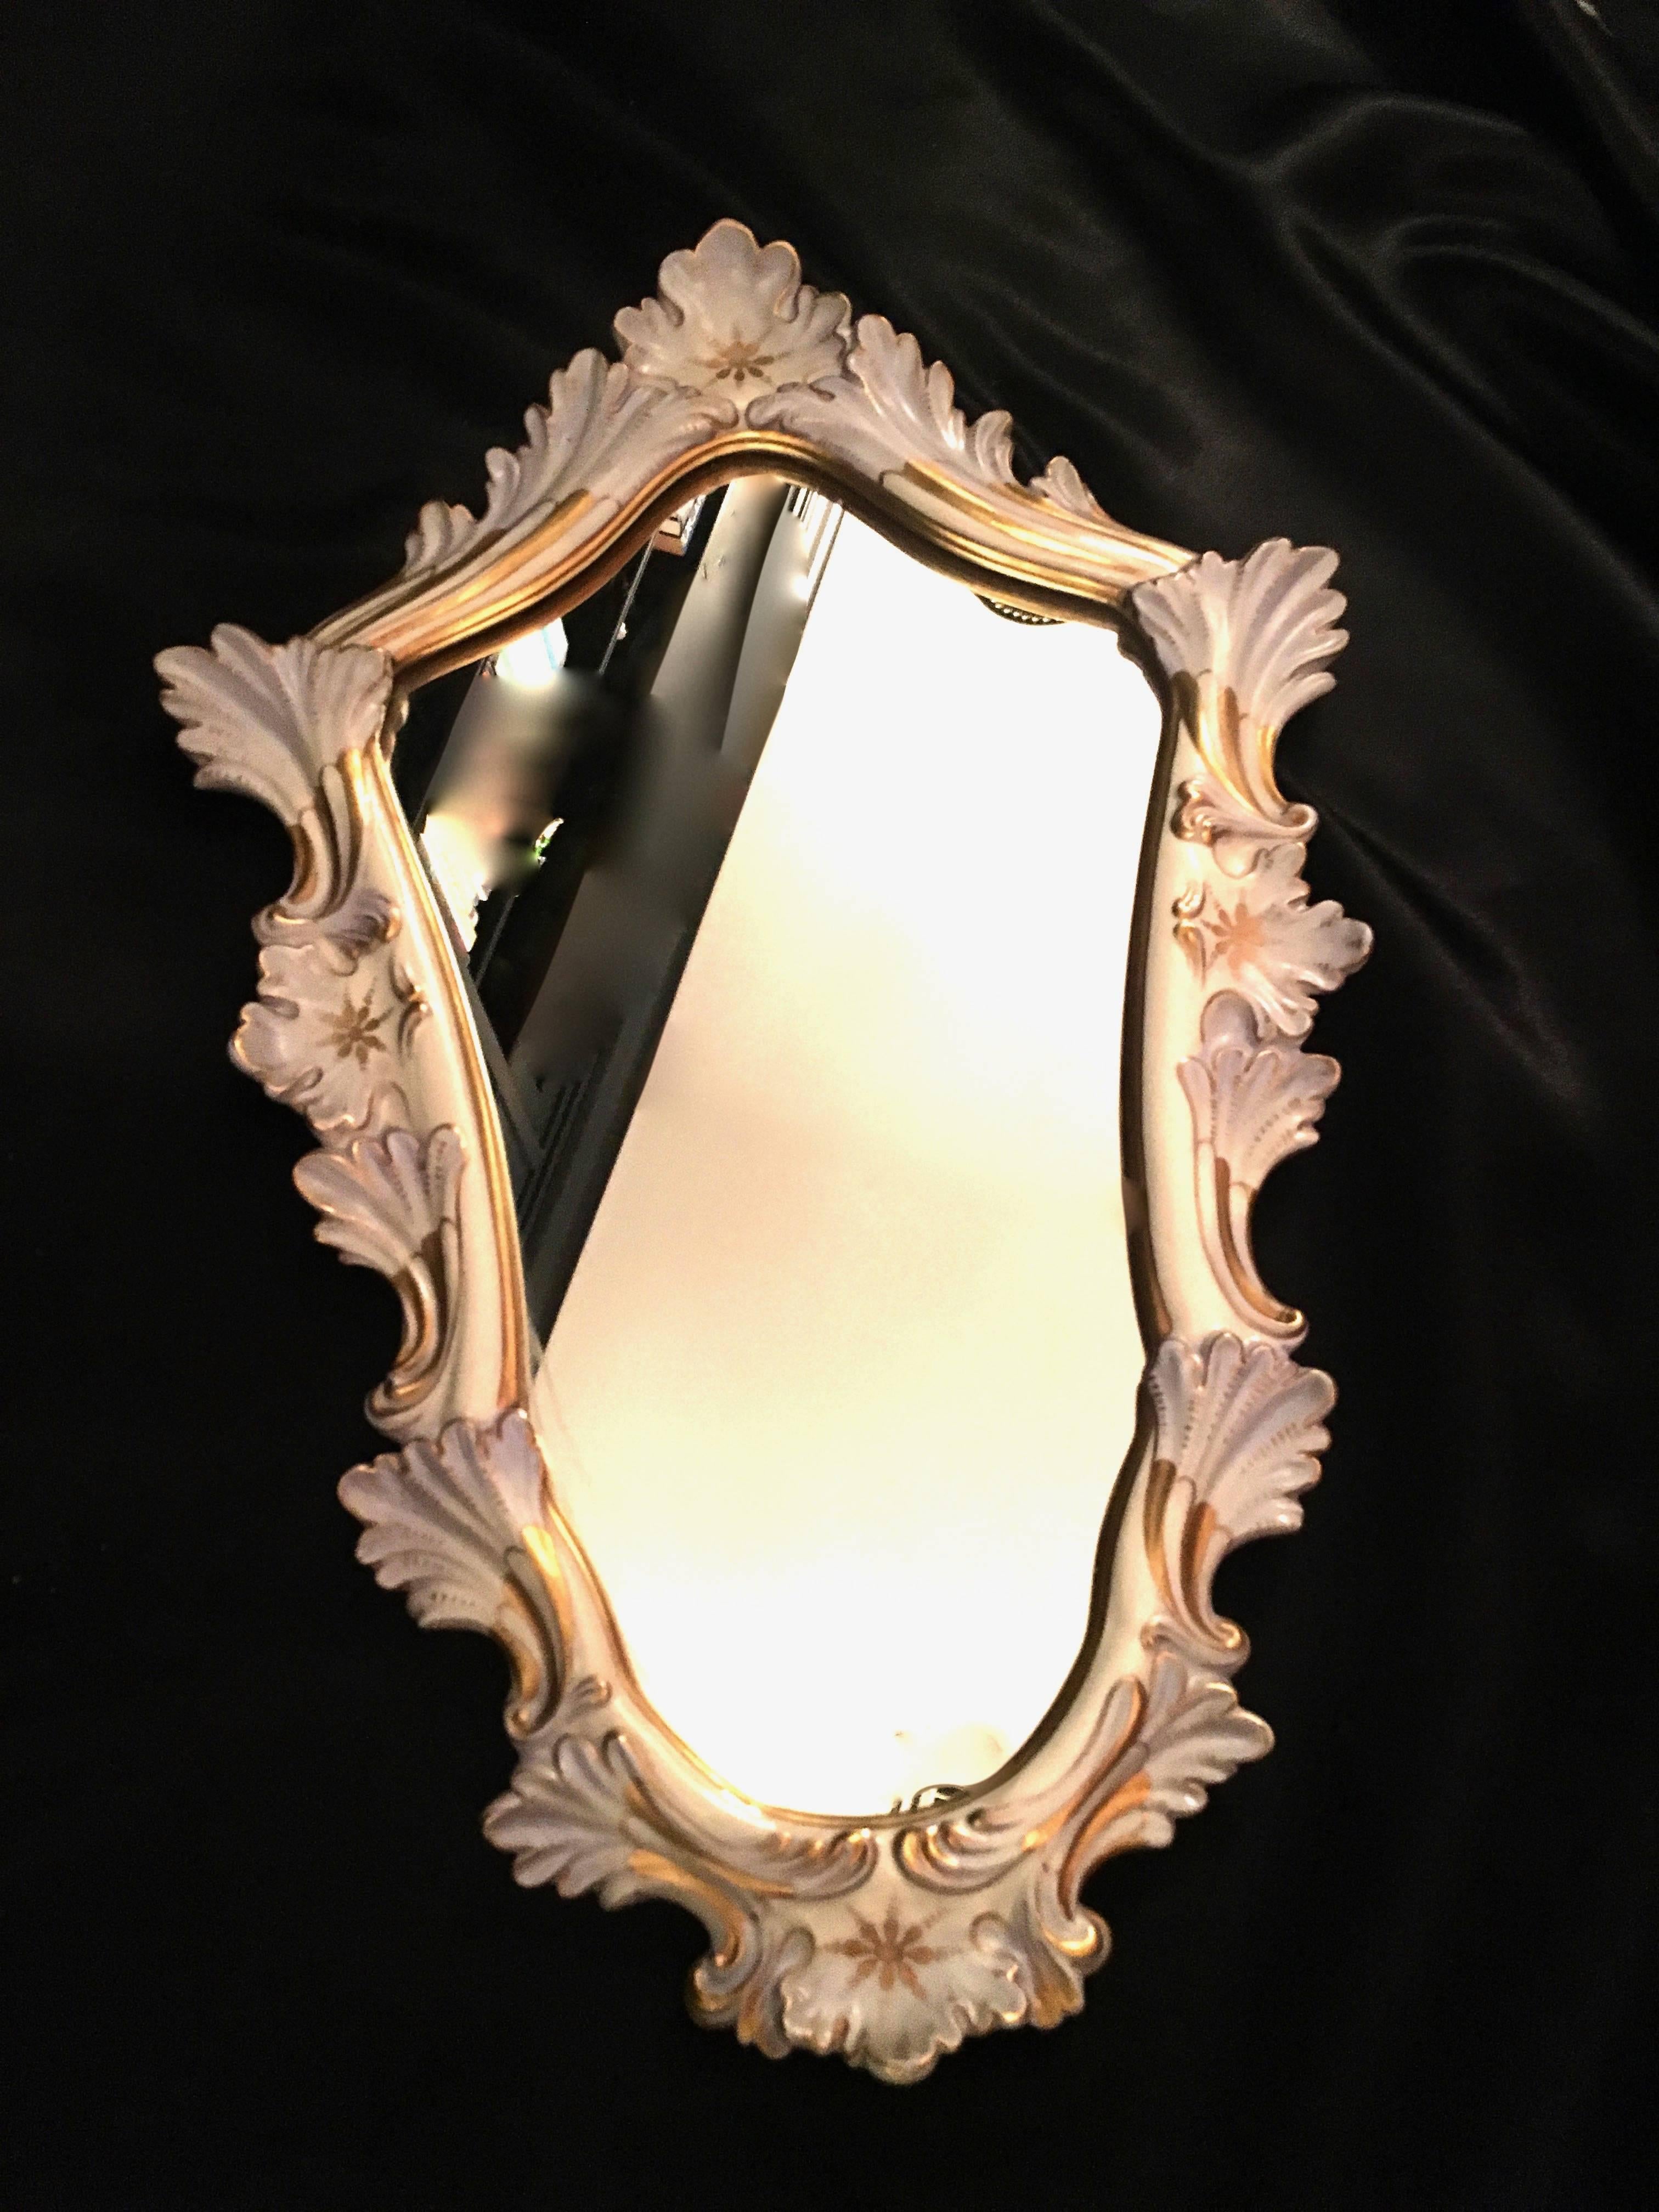 Italian Majolica mirror. A lovely accent to a lonely wall or grouping.